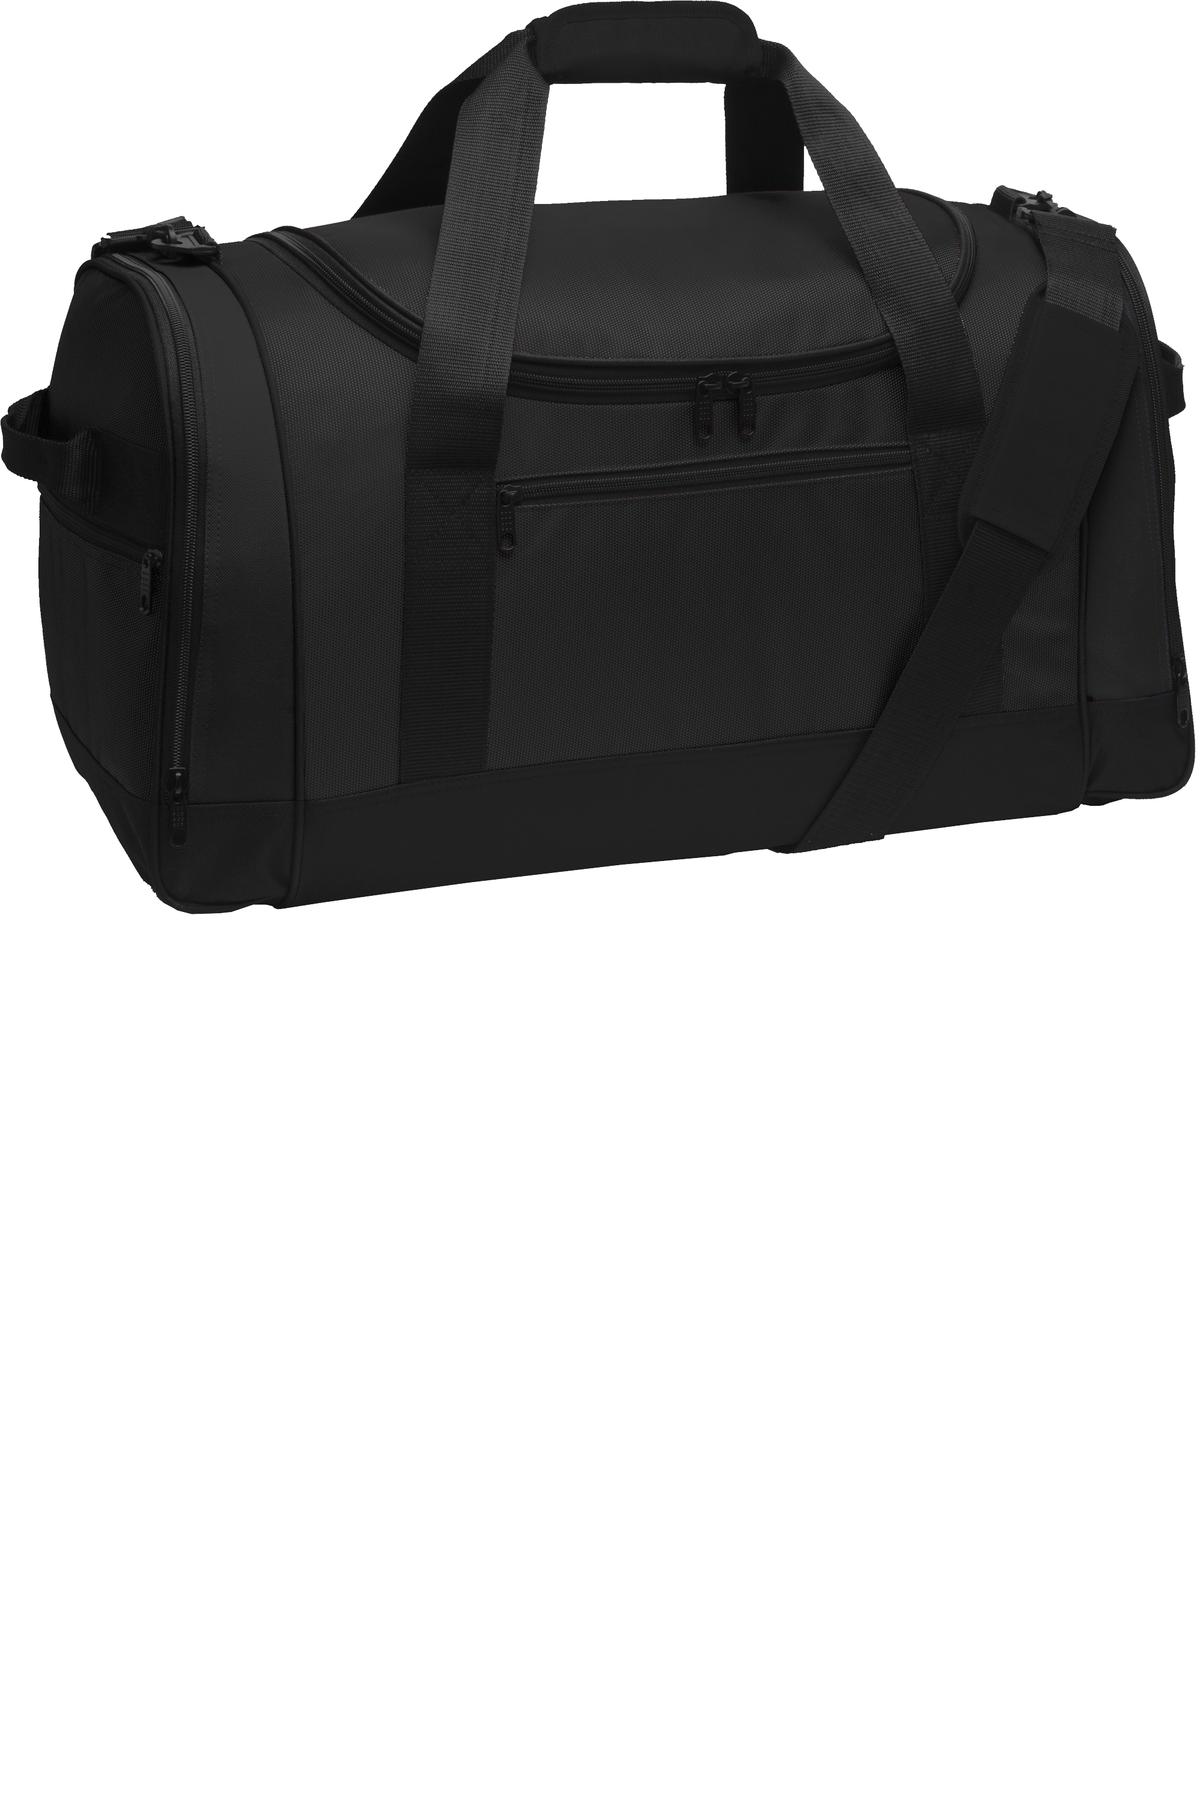 Port Authority Voyager Sports Duffel-